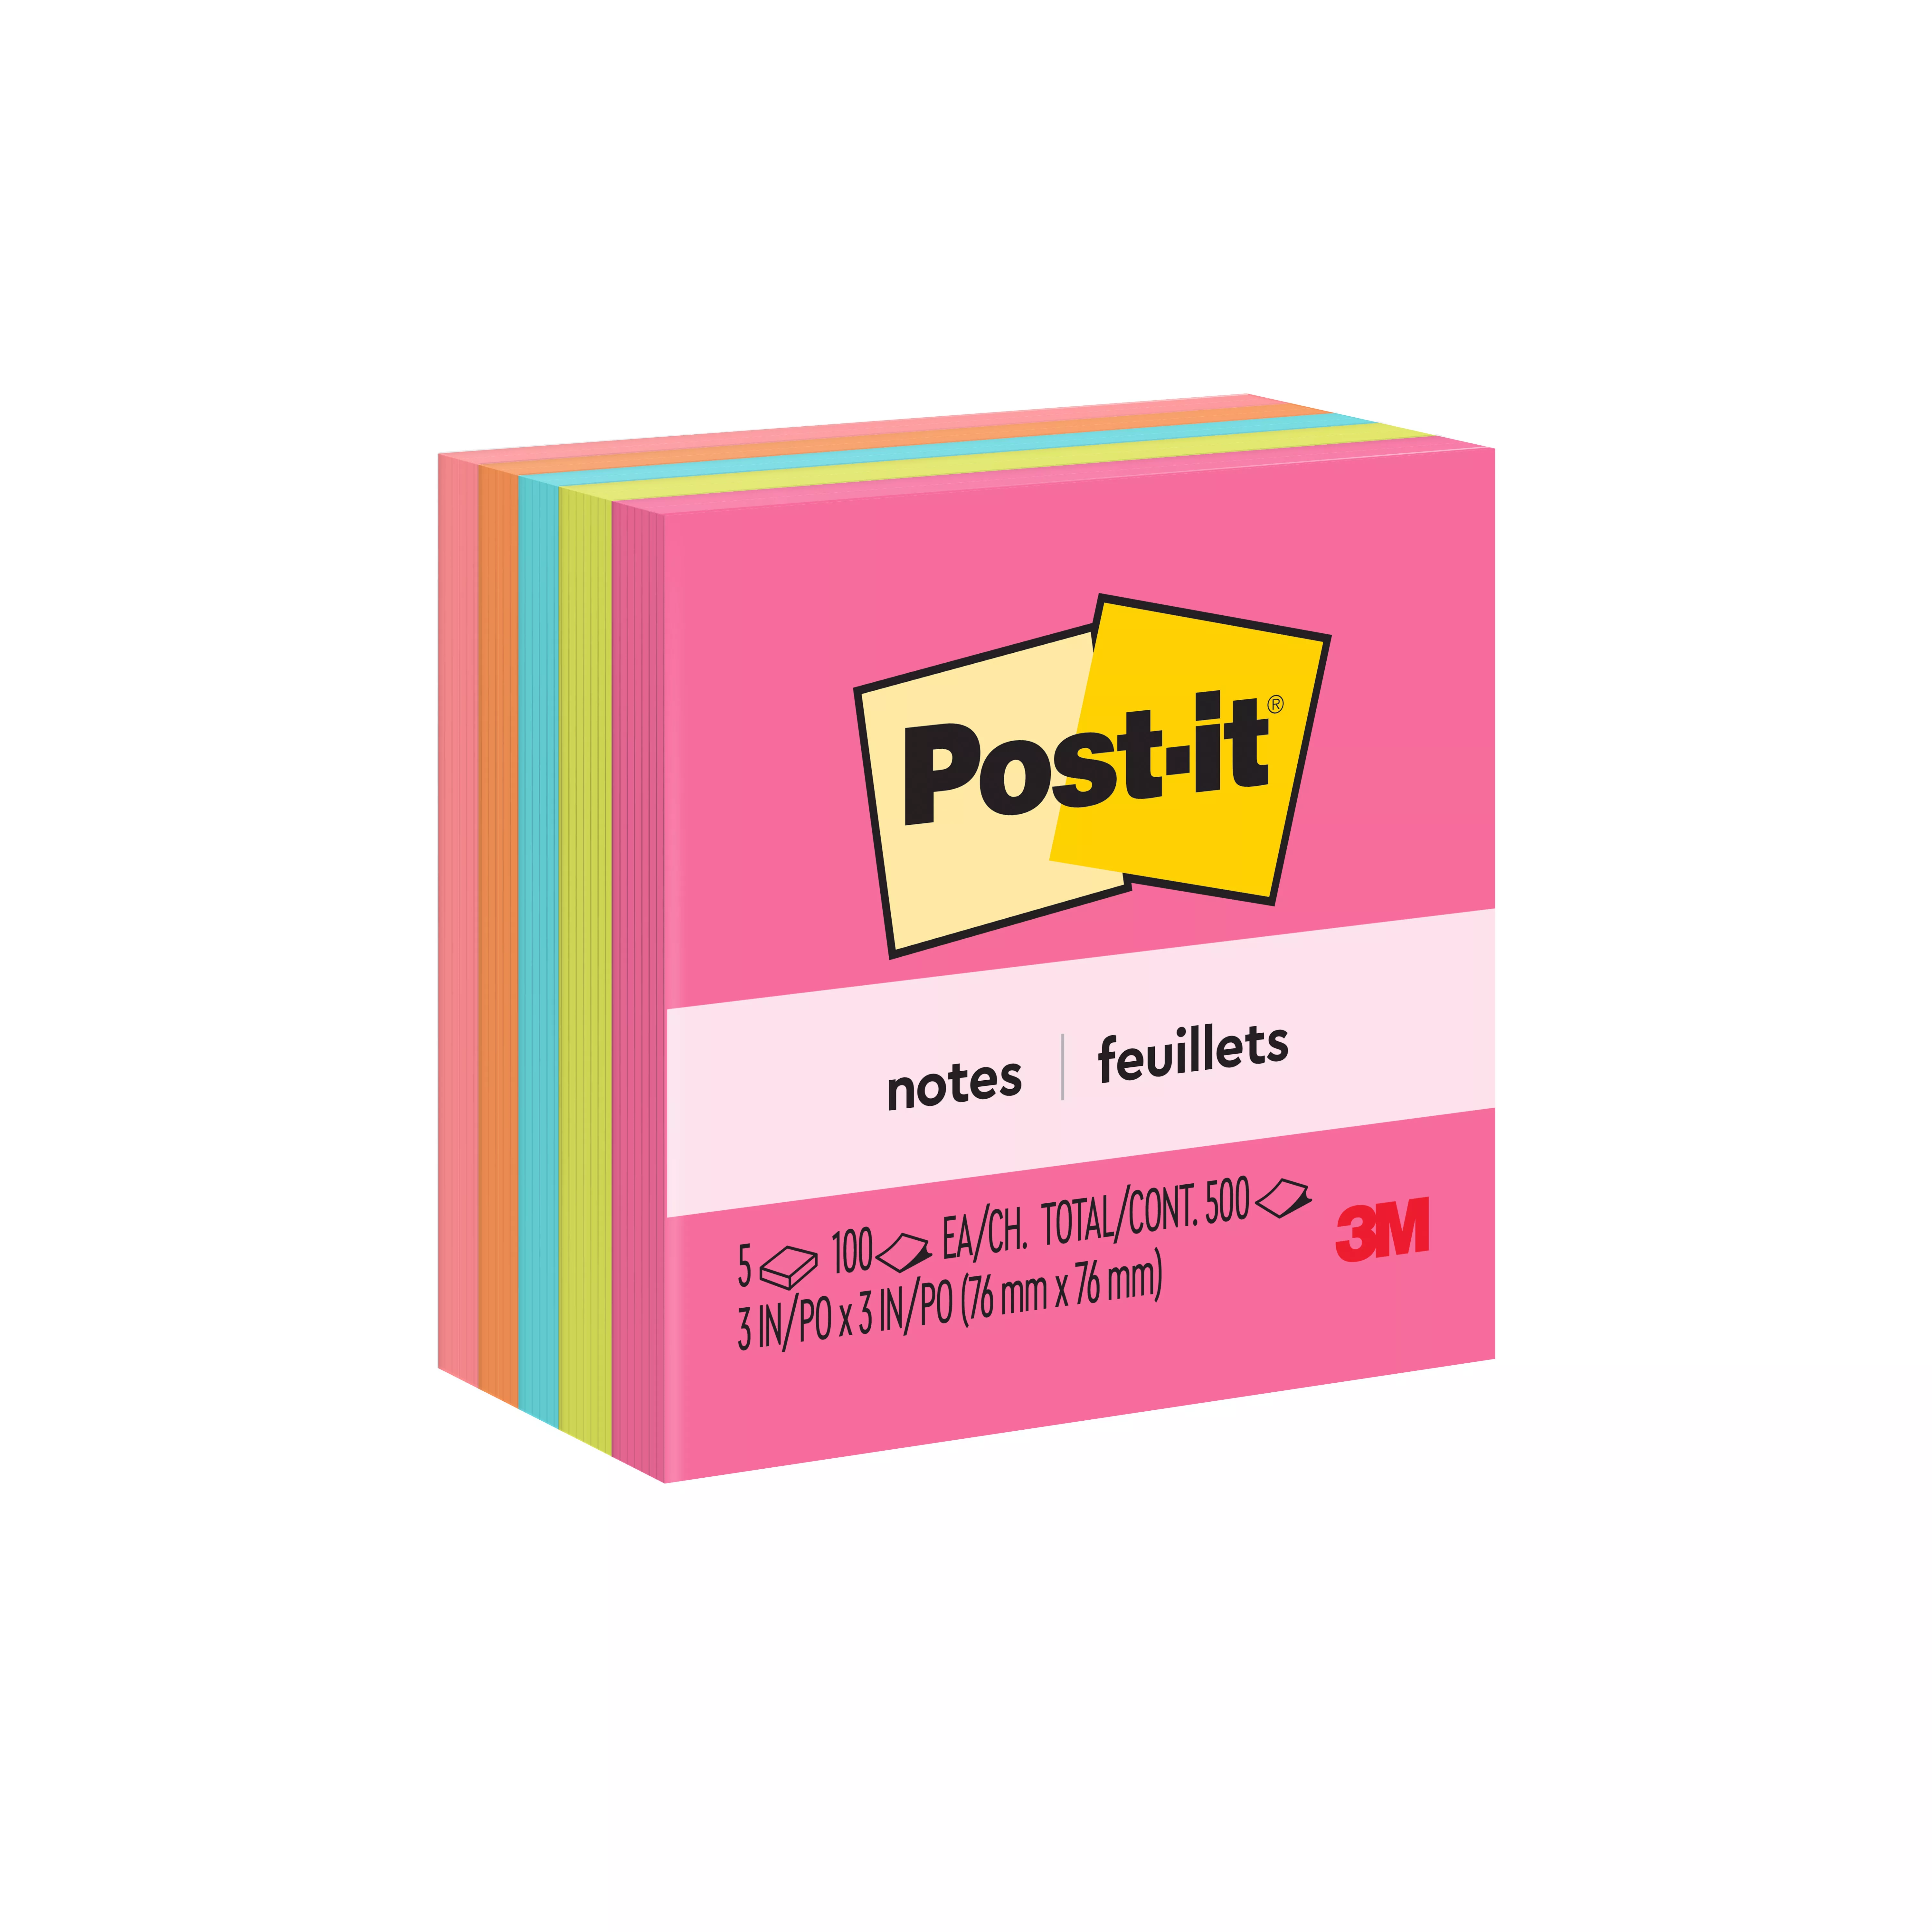 Post-it® Notes 654-5PK, 3 in x 3 in (76 mm x 76 mm)